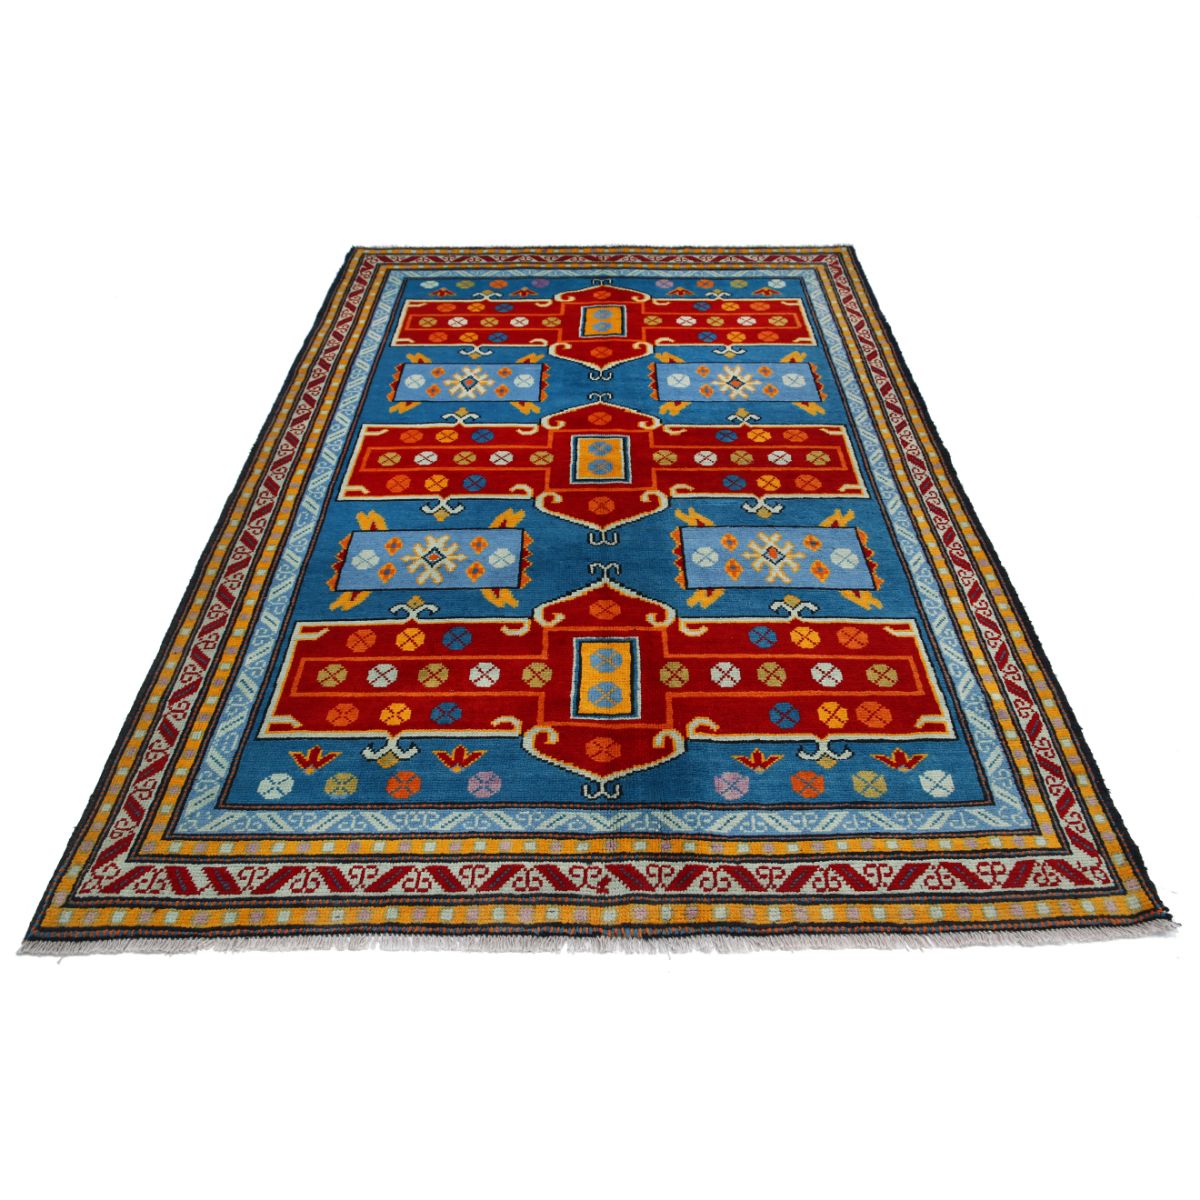 Revival 5' 8" X 7' 11" Wool Hand Knotted Rug